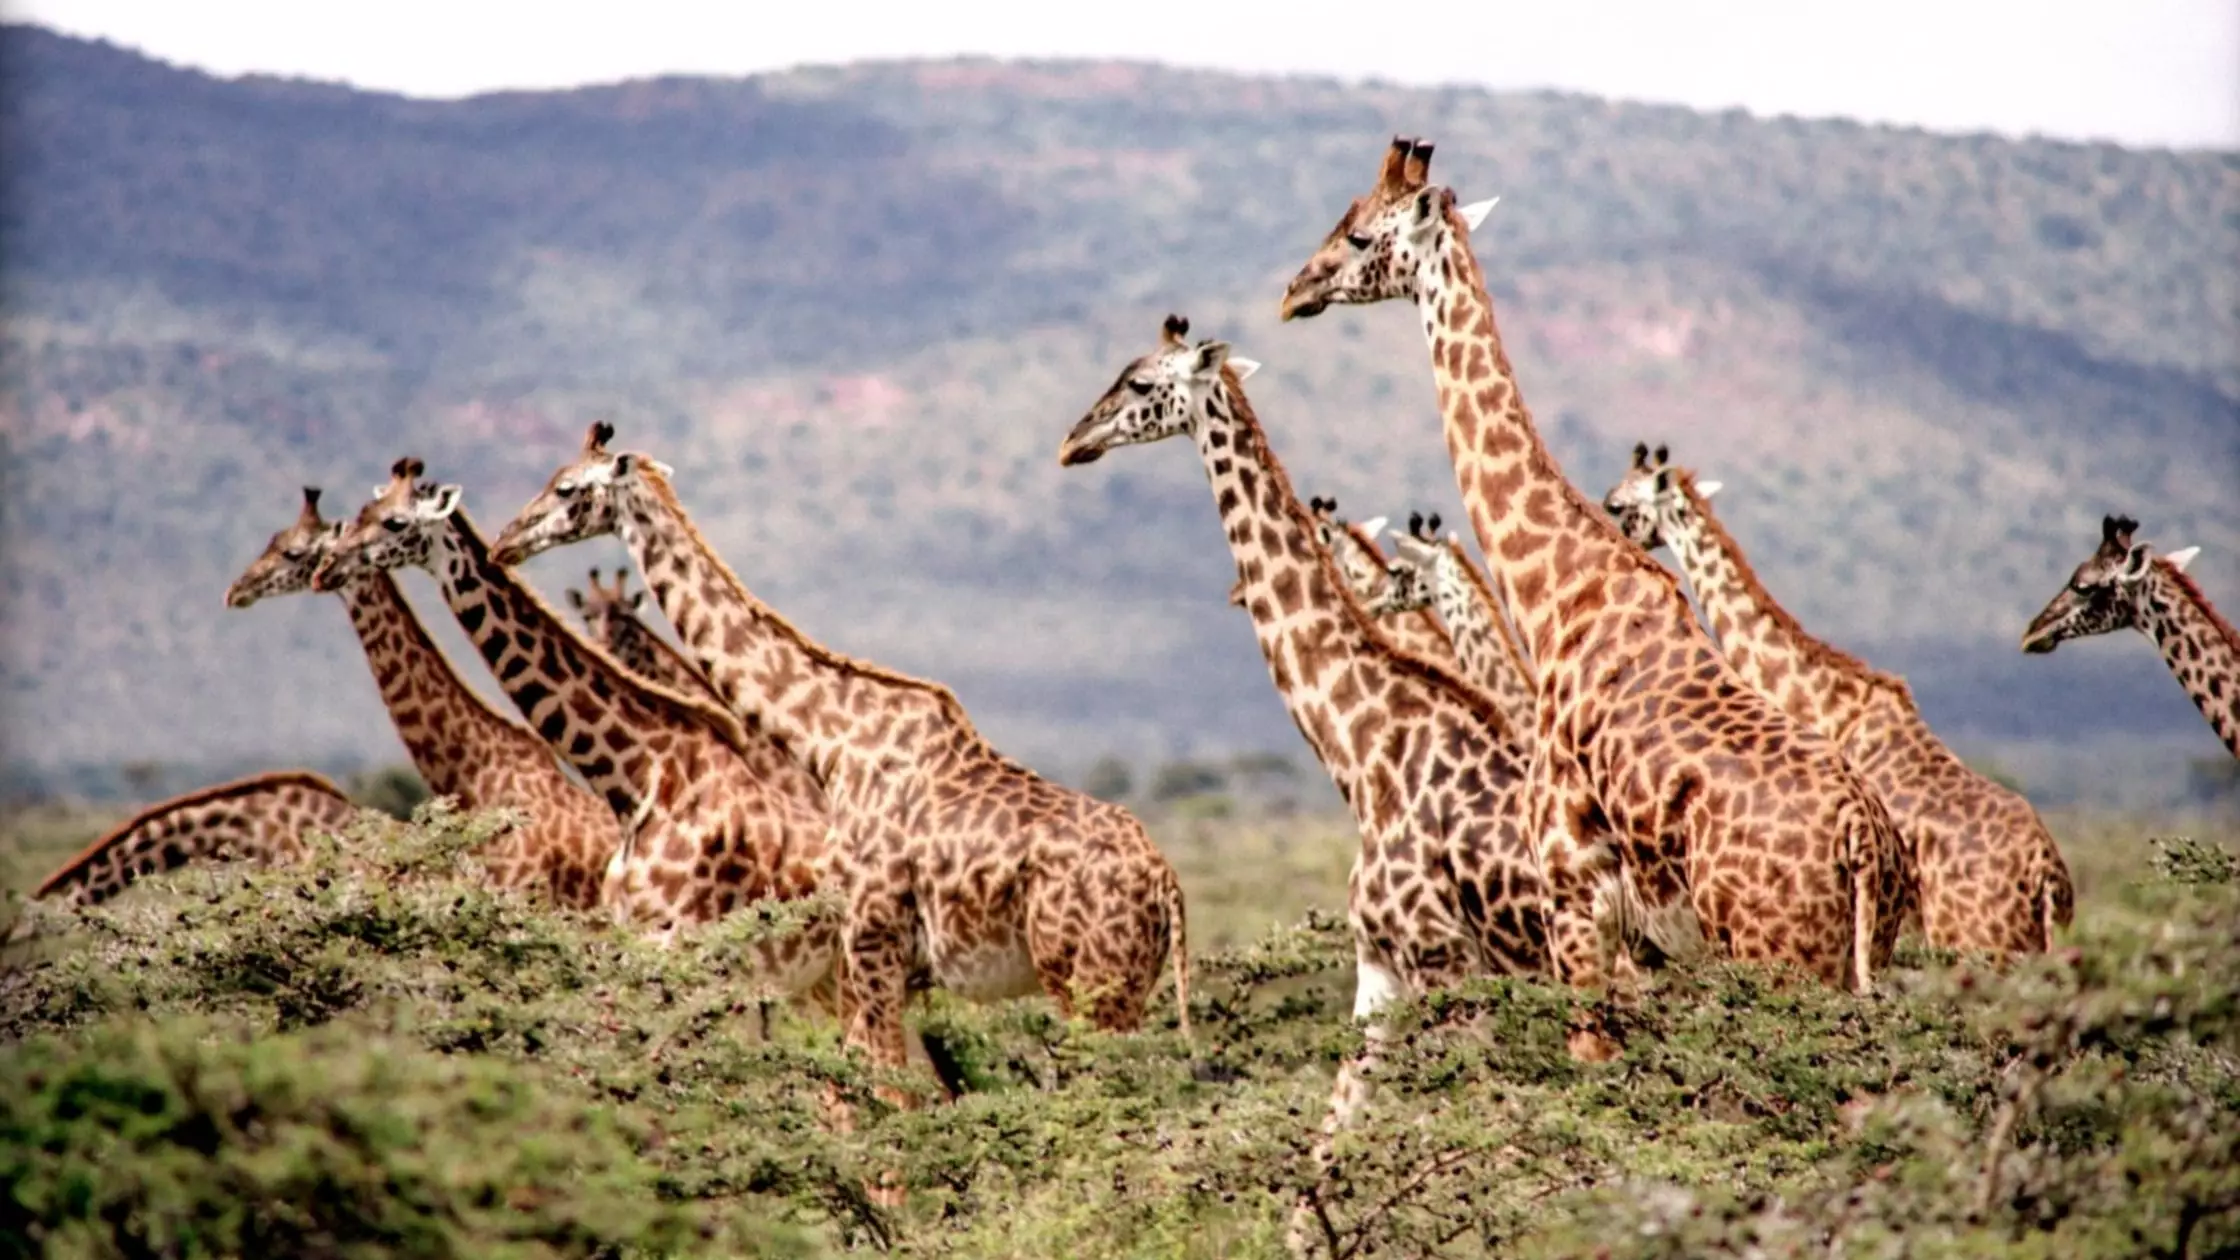 Giraffes Are Facing 'Silent Extinction' And We Need To Act Now